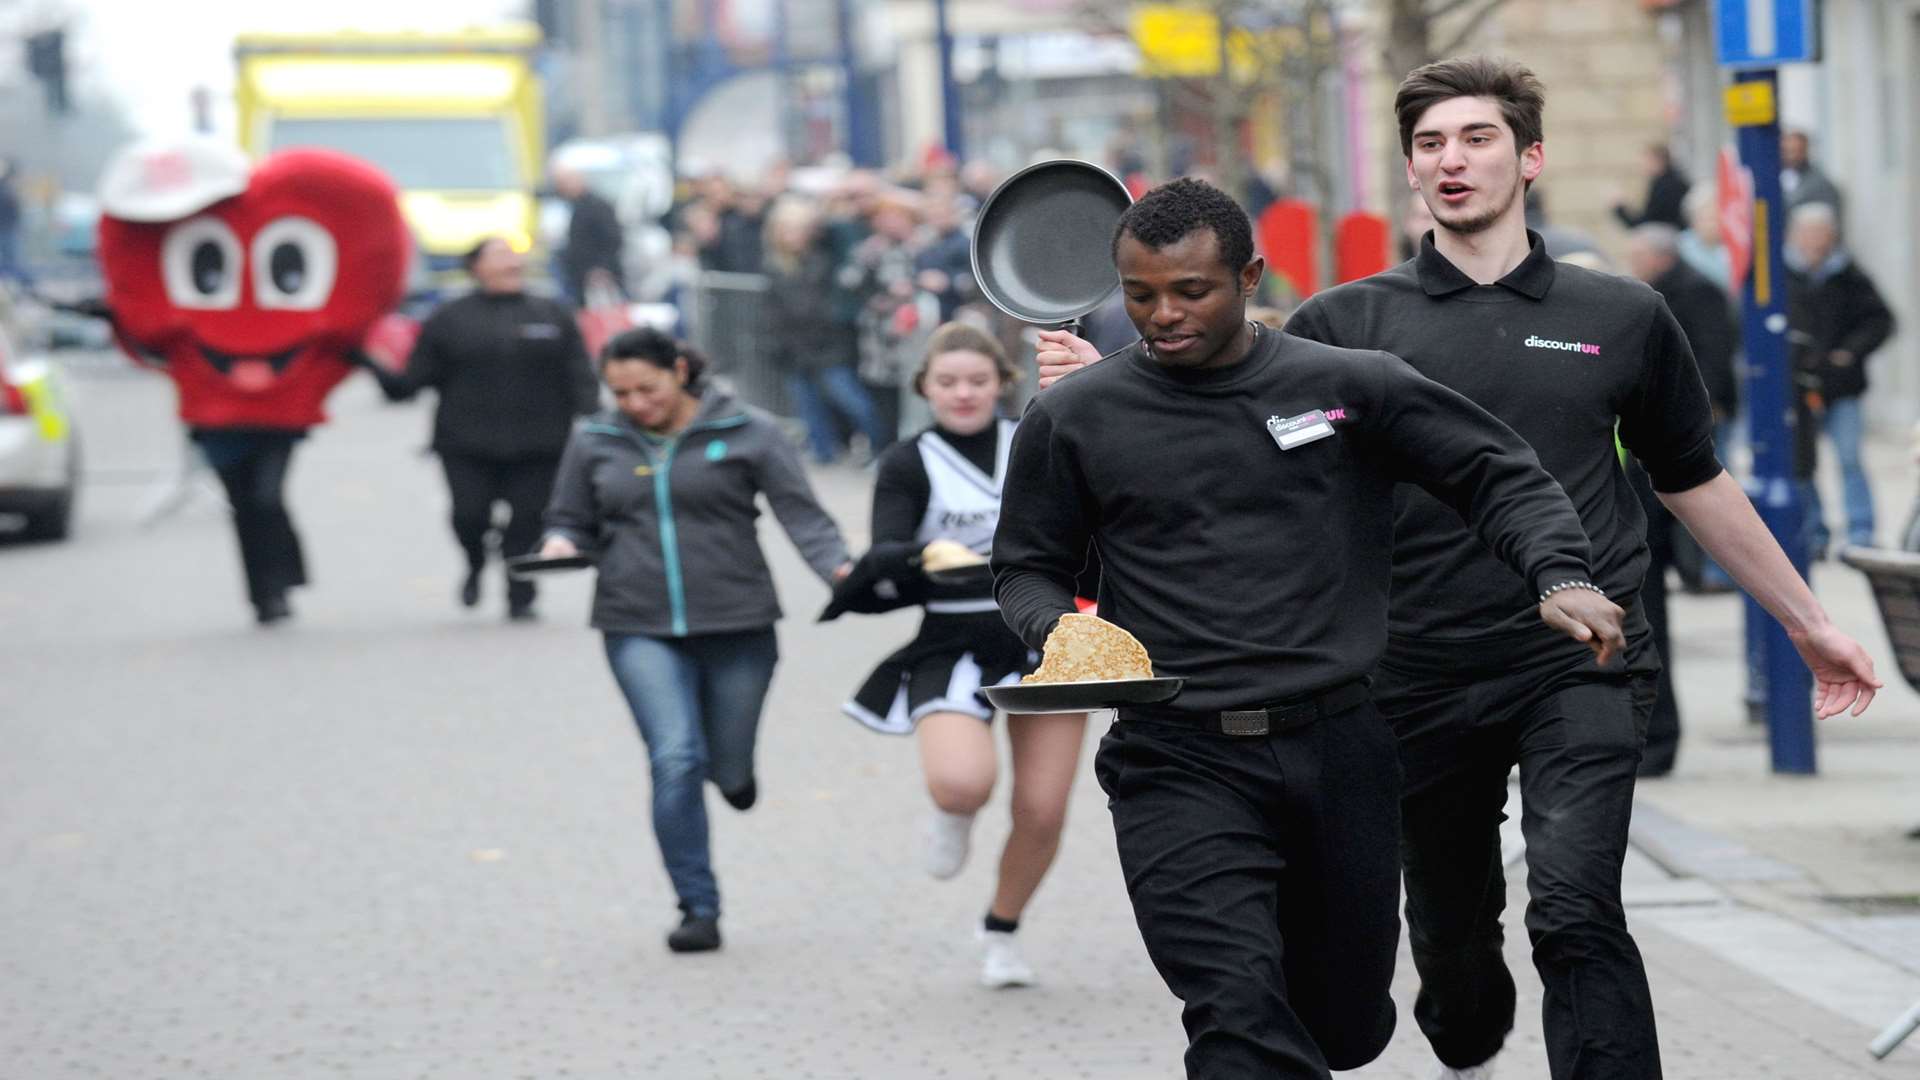 Gravesend holds a pancake race every year